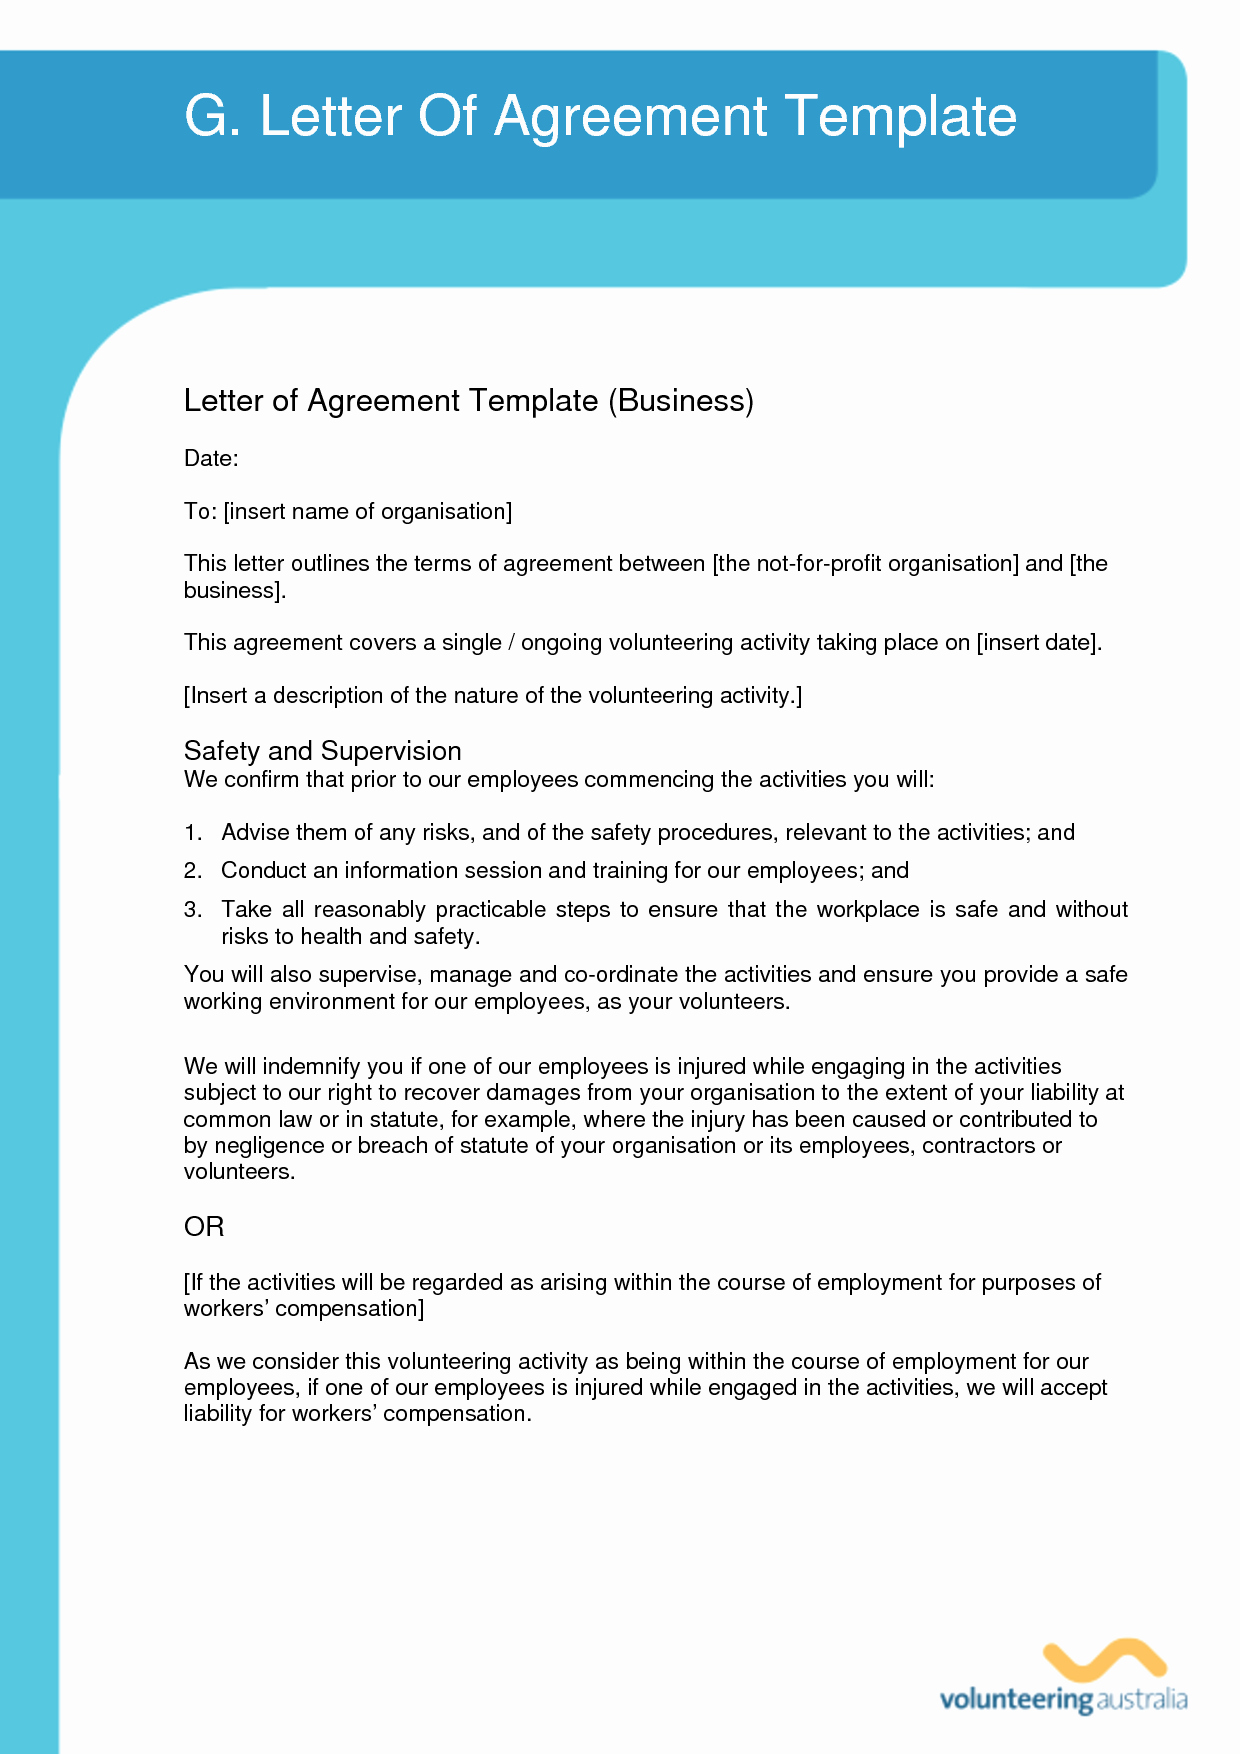 Letter Of Agreement Template Free Fresh Agreement Letter Template Free Printable Documents